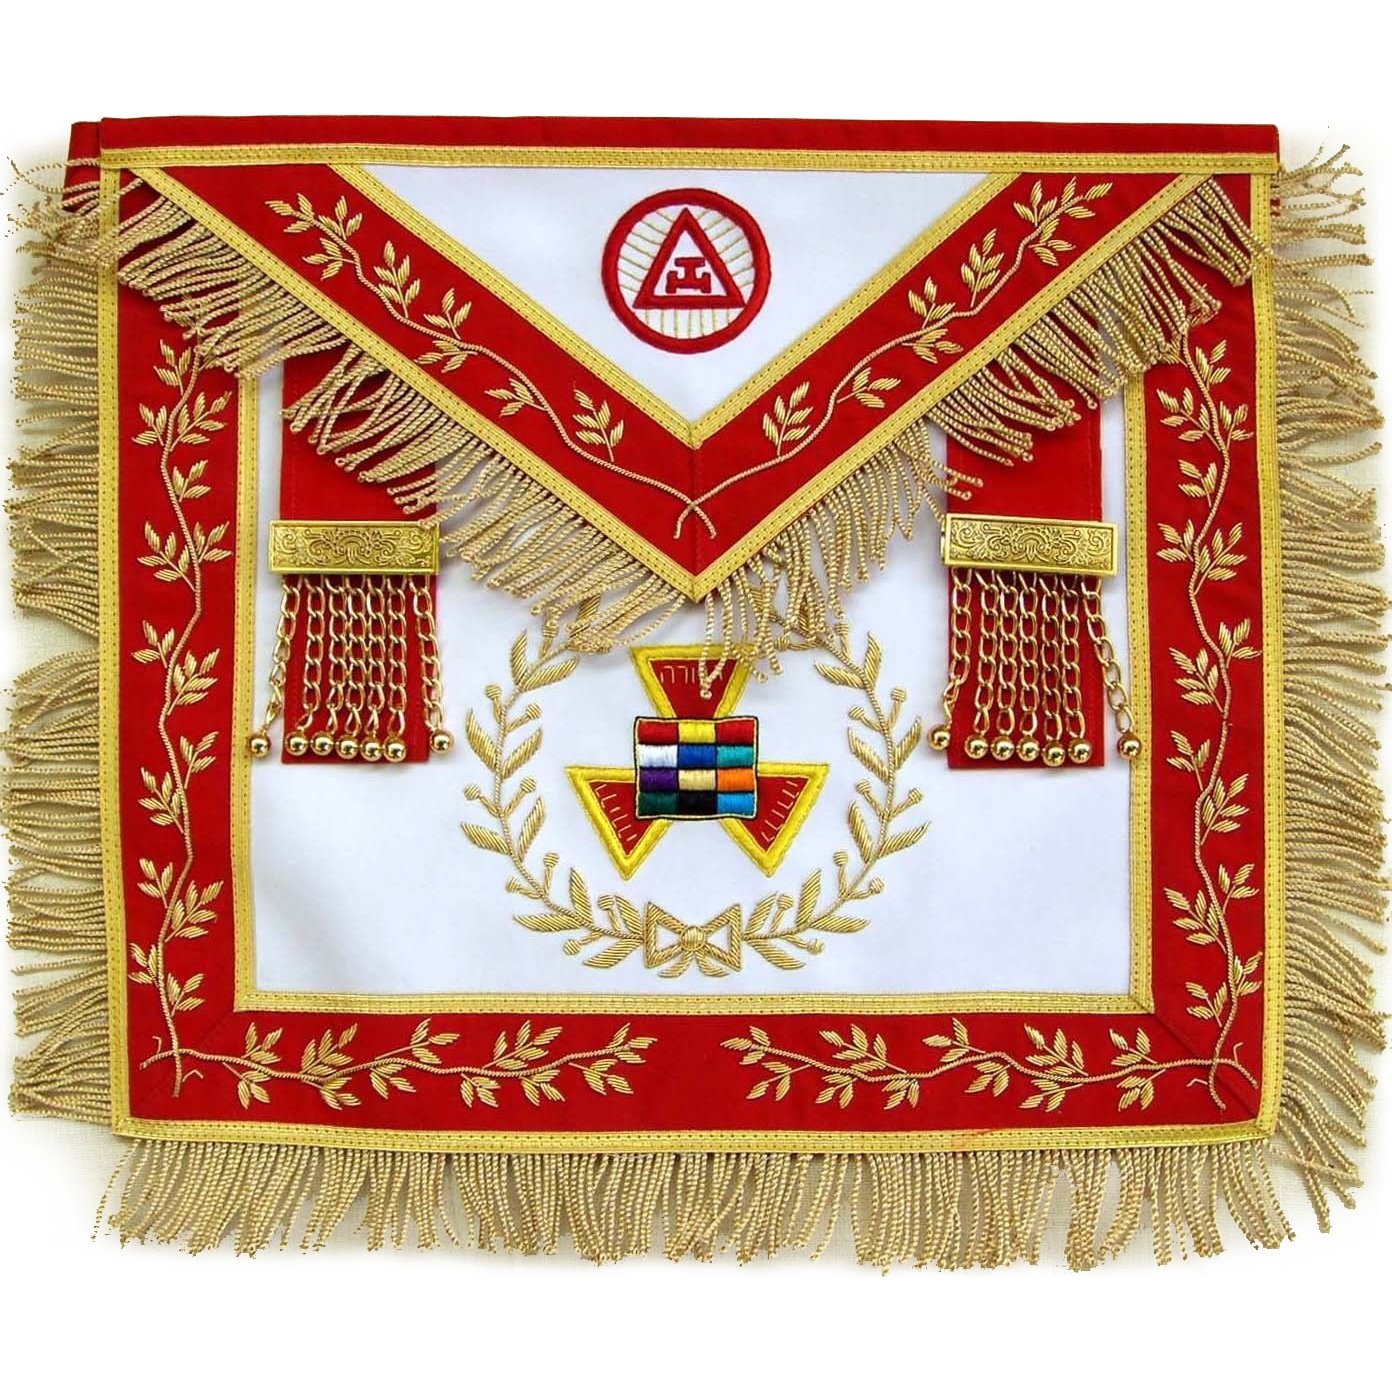 Grand High Priest Royal Arch Chapter Apron - Red Velvet with Wreath & Fringe - Bricks Masons